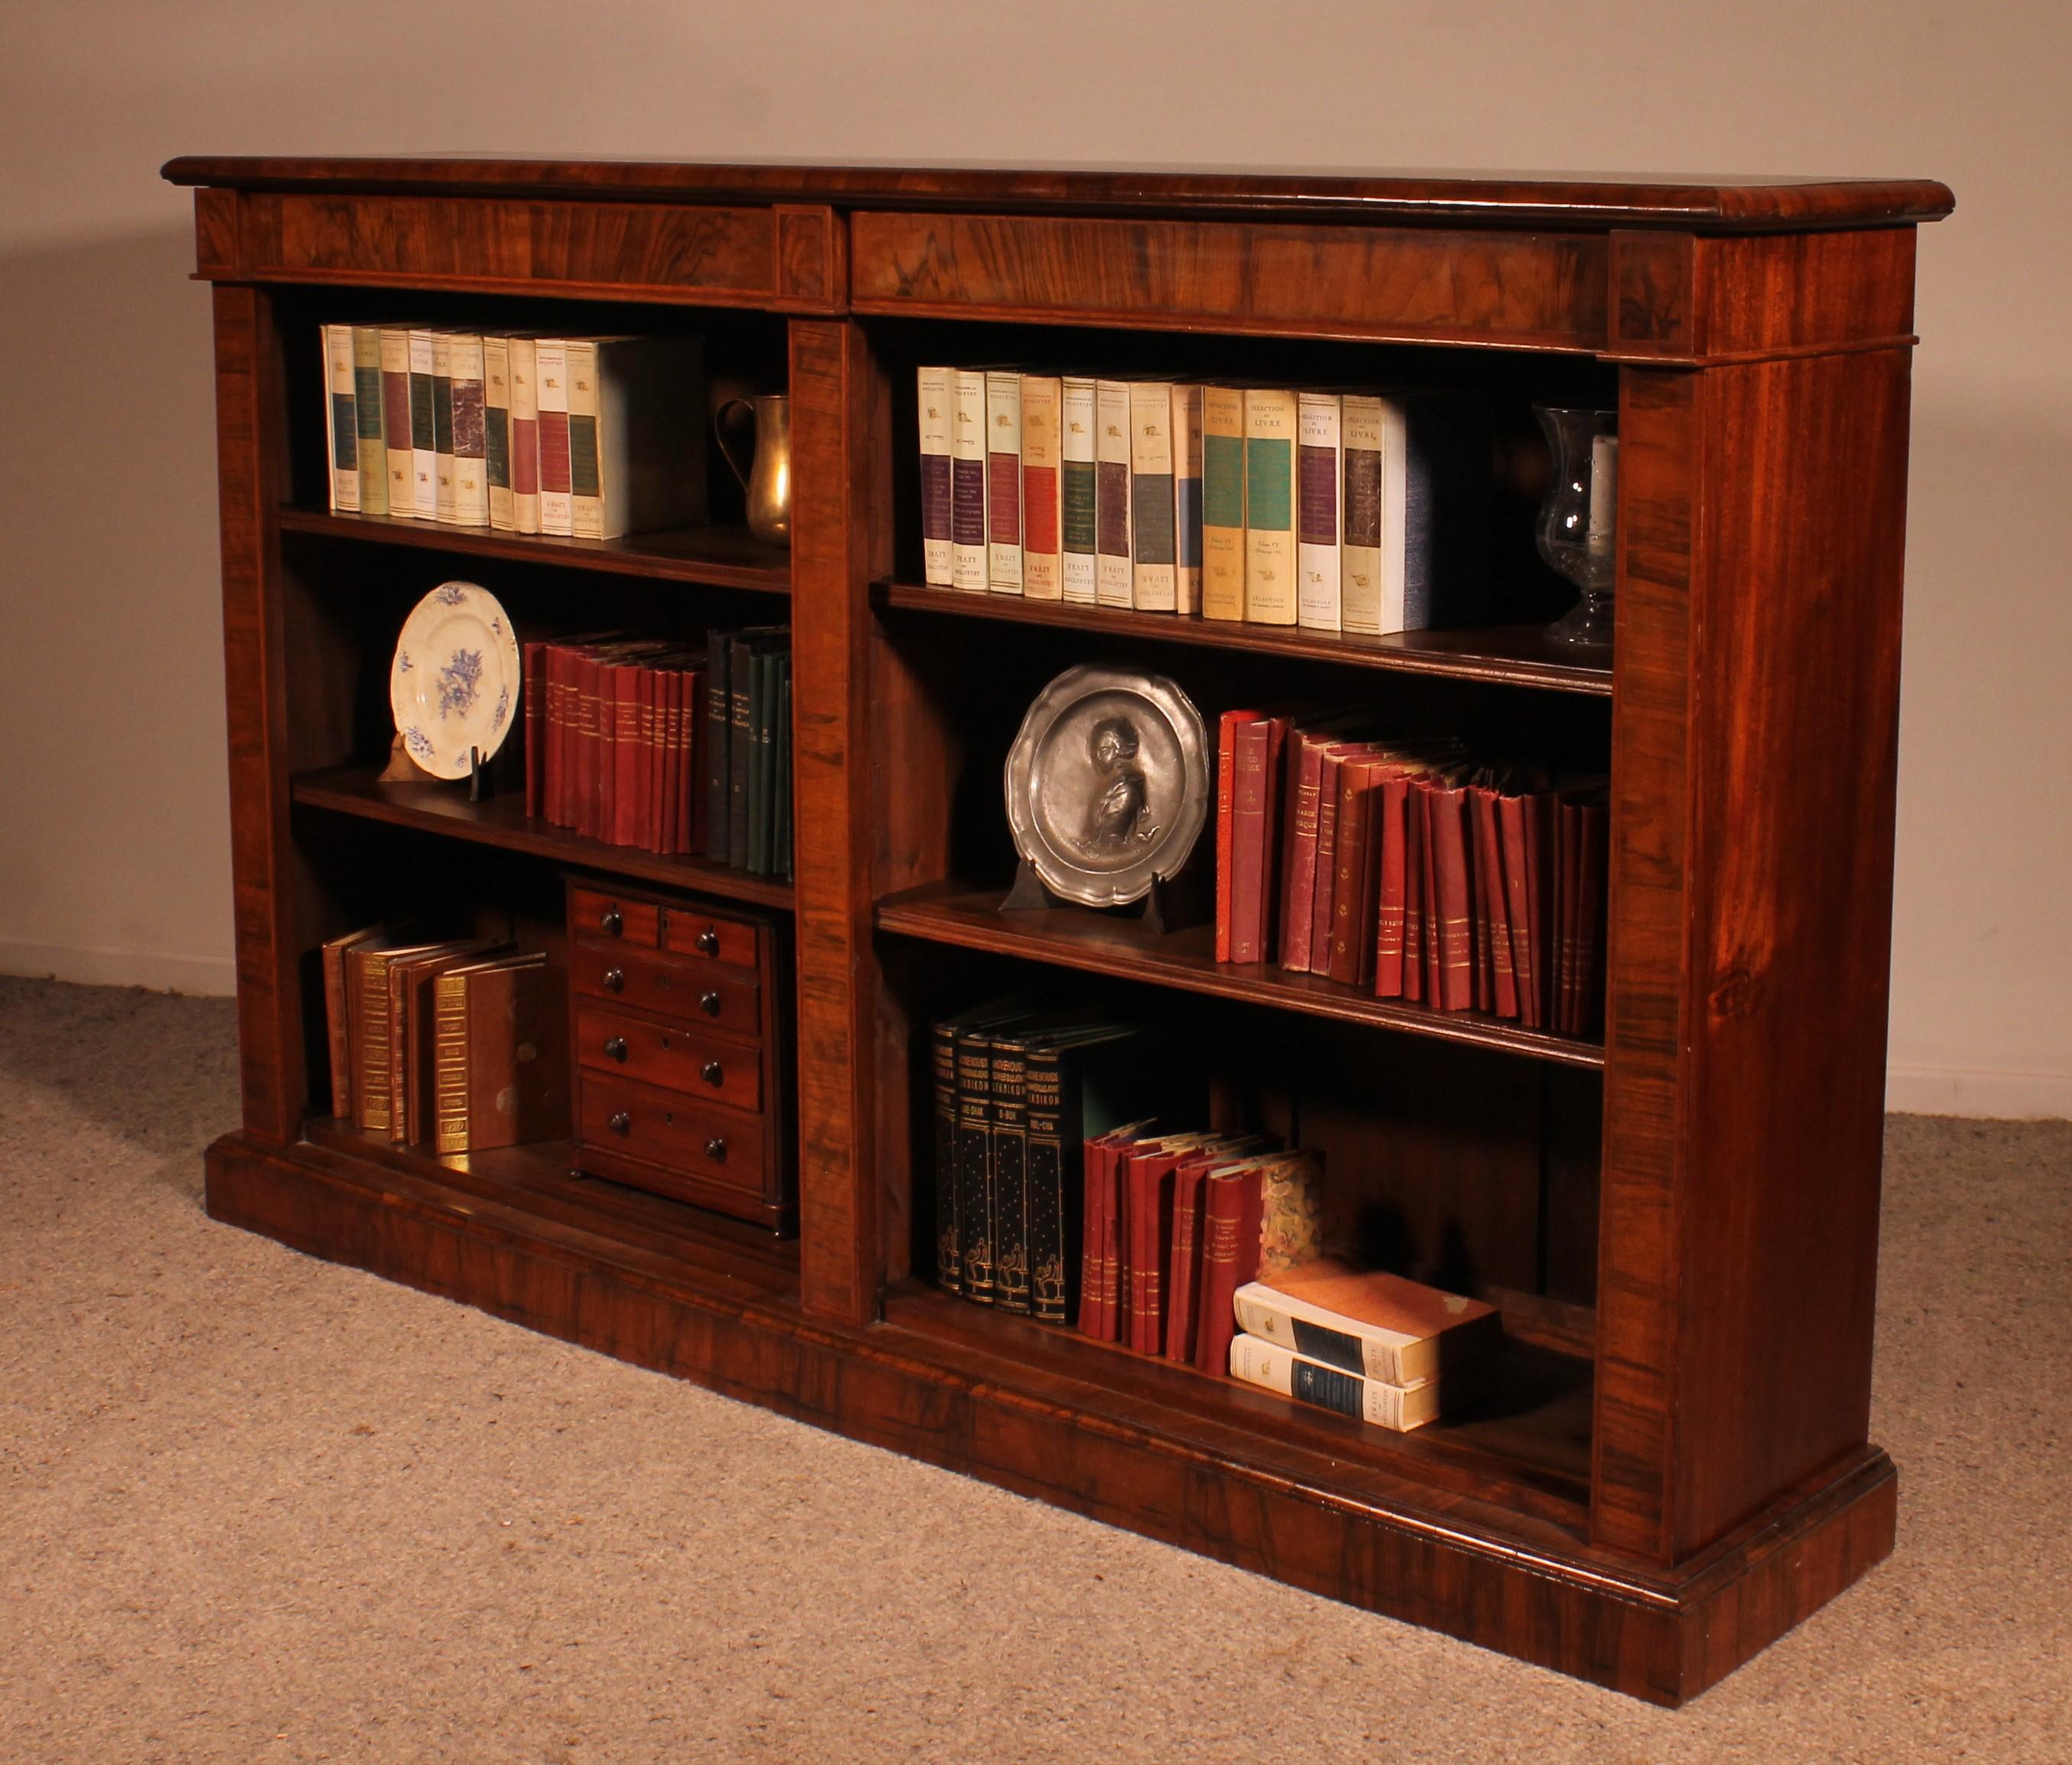 Large Open Bookcase In Walnut And Inlays From The 19th Century 3